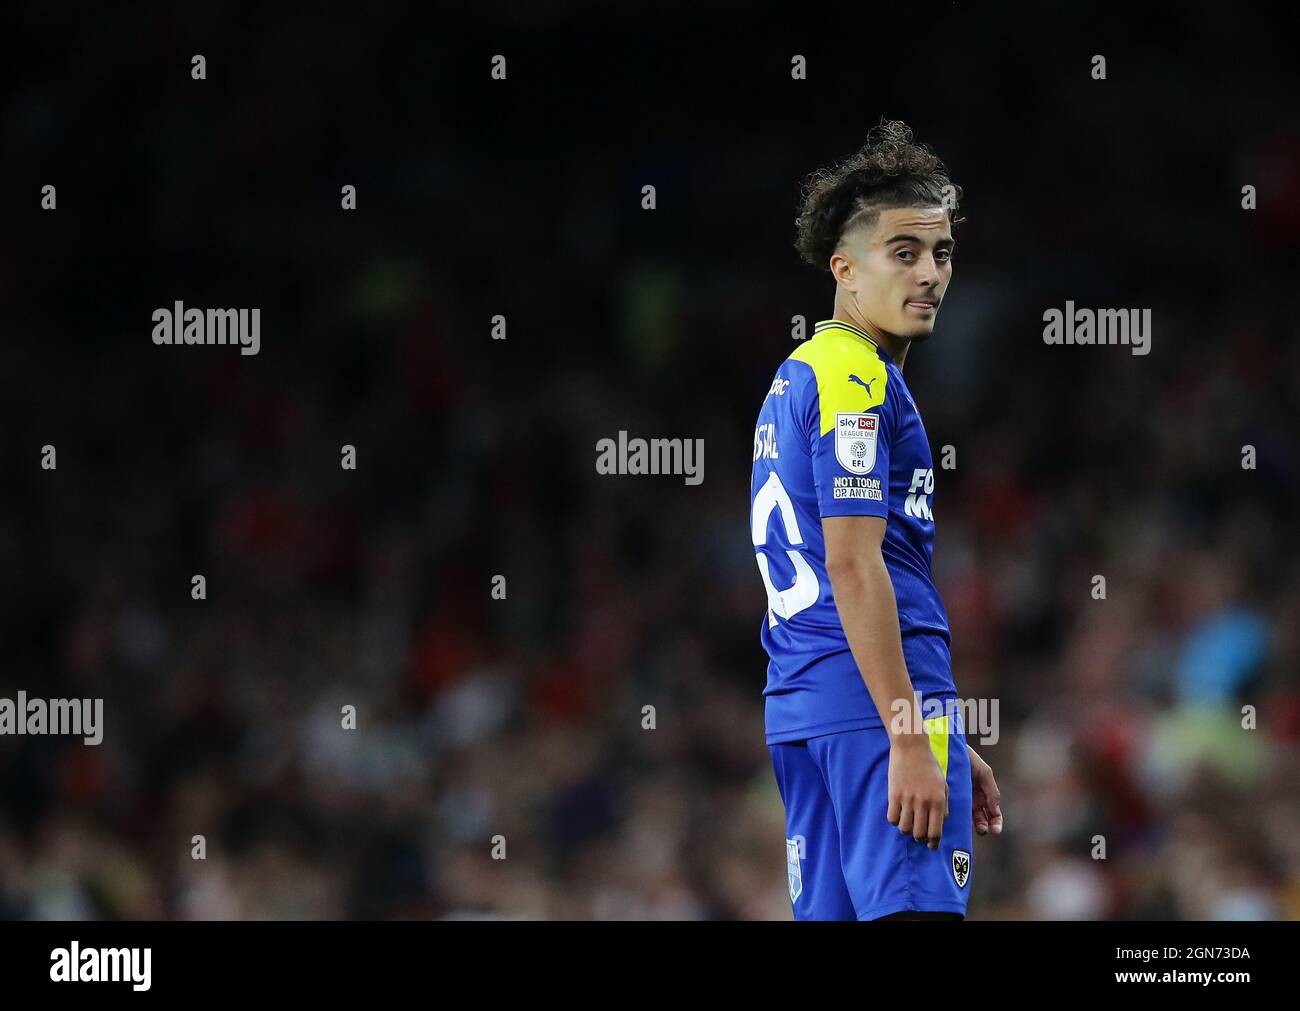 London, England, 22nd September 2021. Ayoub Assal of AFC Wimbledon during the Carabao Cup match at the Emirates Stadium, London. Picture credit should read: David Klein / Sportimage Credit: Sportimage/Alamy Live News Stock Photo